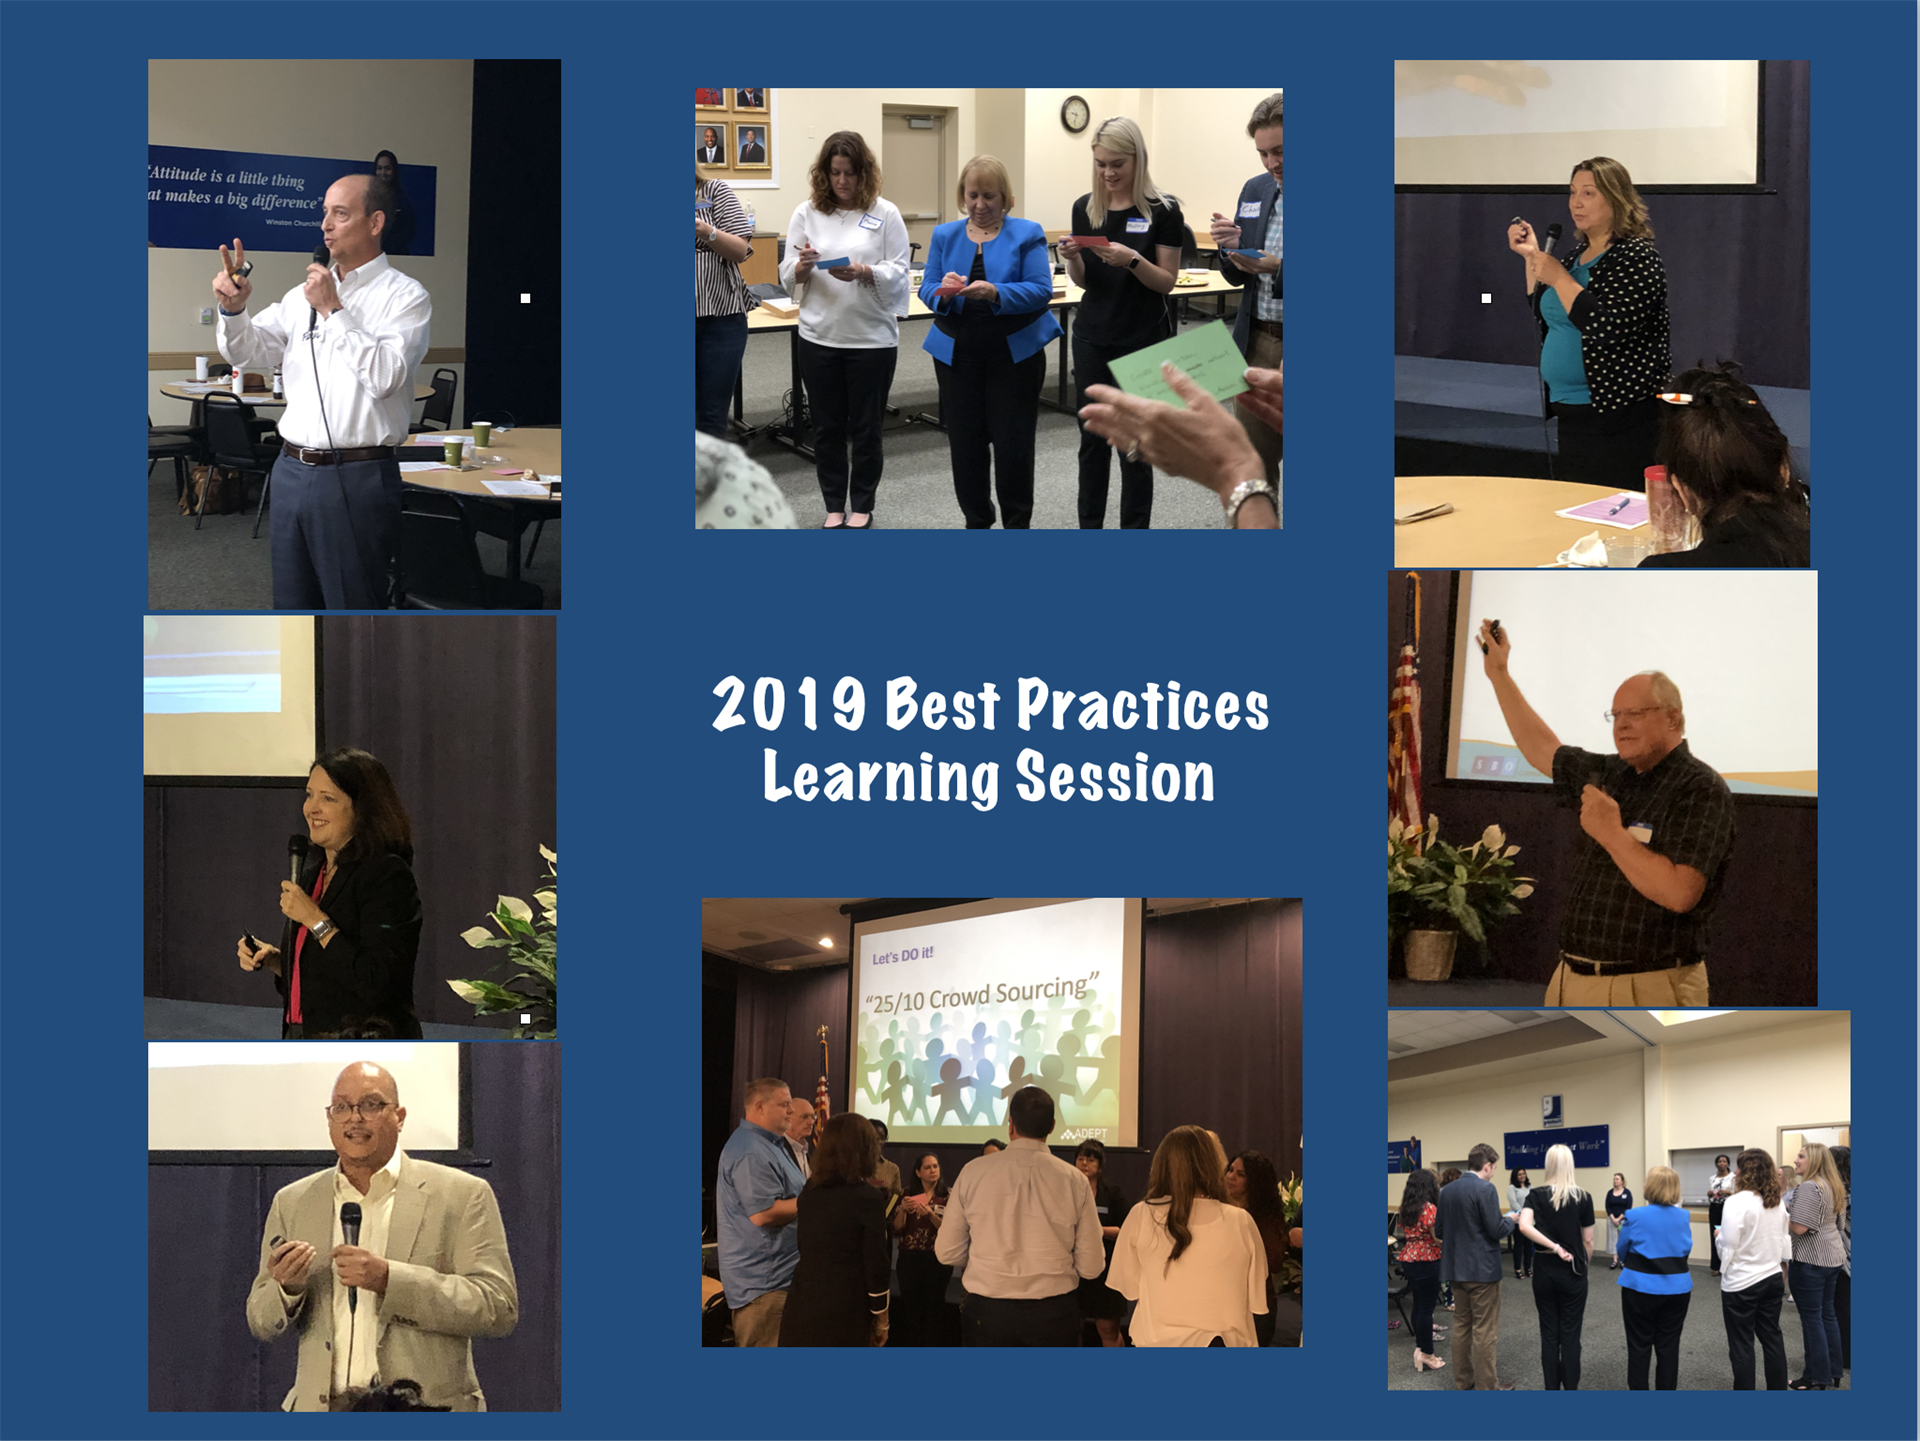 2019 Best Practices Learning Session Image